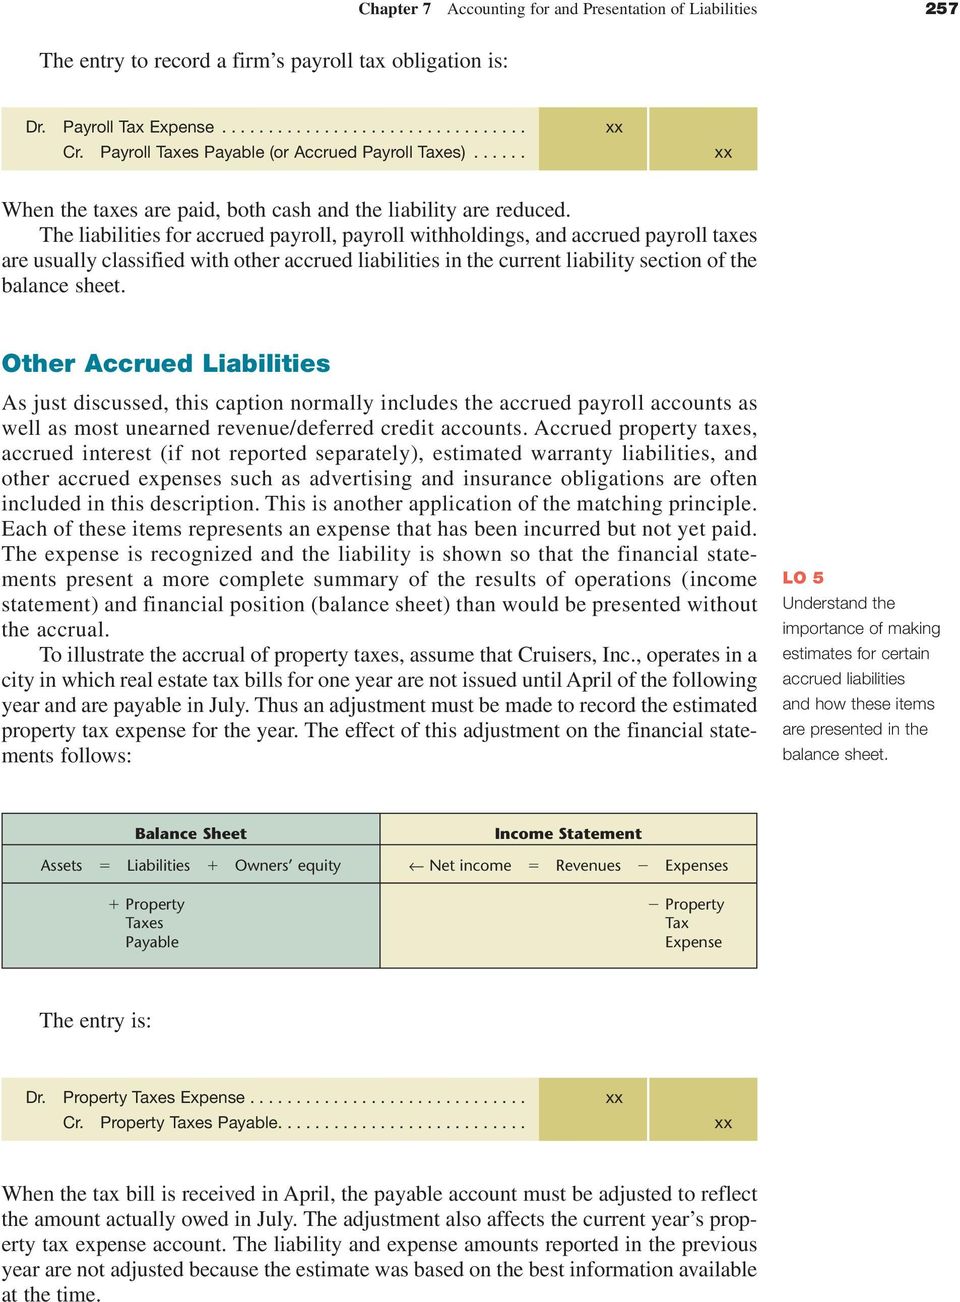 The liabilities for accrued payroll, payroll withholdings, and accrued payroll taxes are usually classified with other accrued liabilities in the current liability section of the balance sheet.